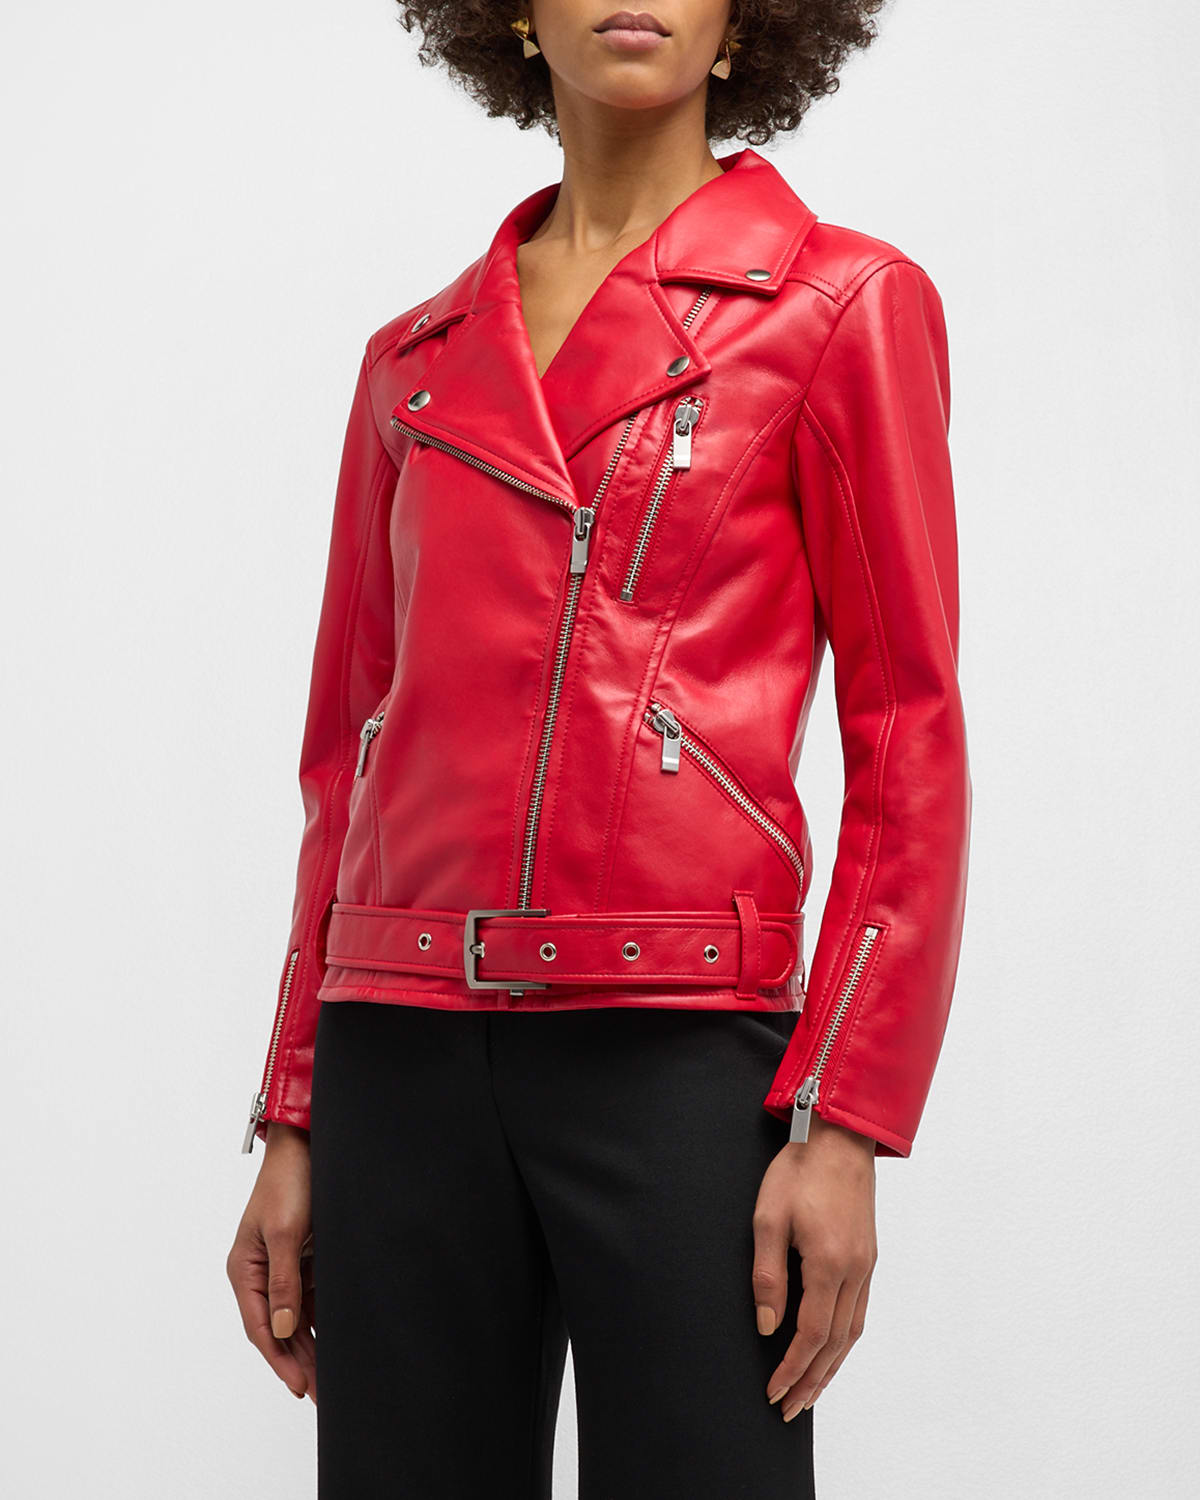 As By Df Brando Recycled Leather Boyfriend Jacket In Coco Red